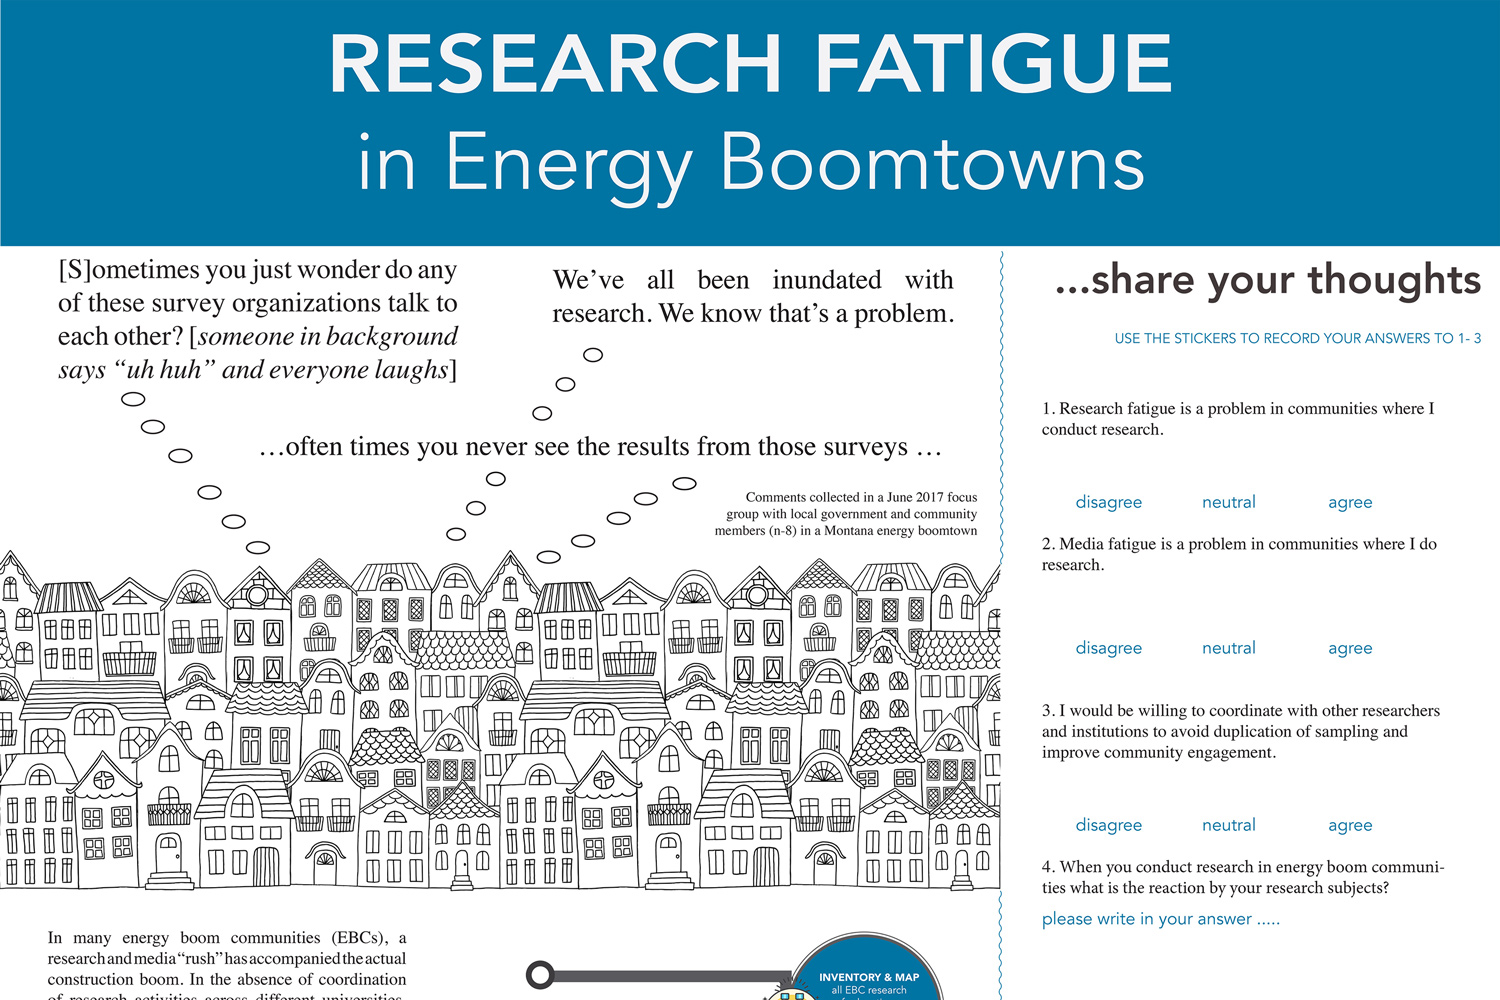 Research Fatigue in Energy Boomtowns